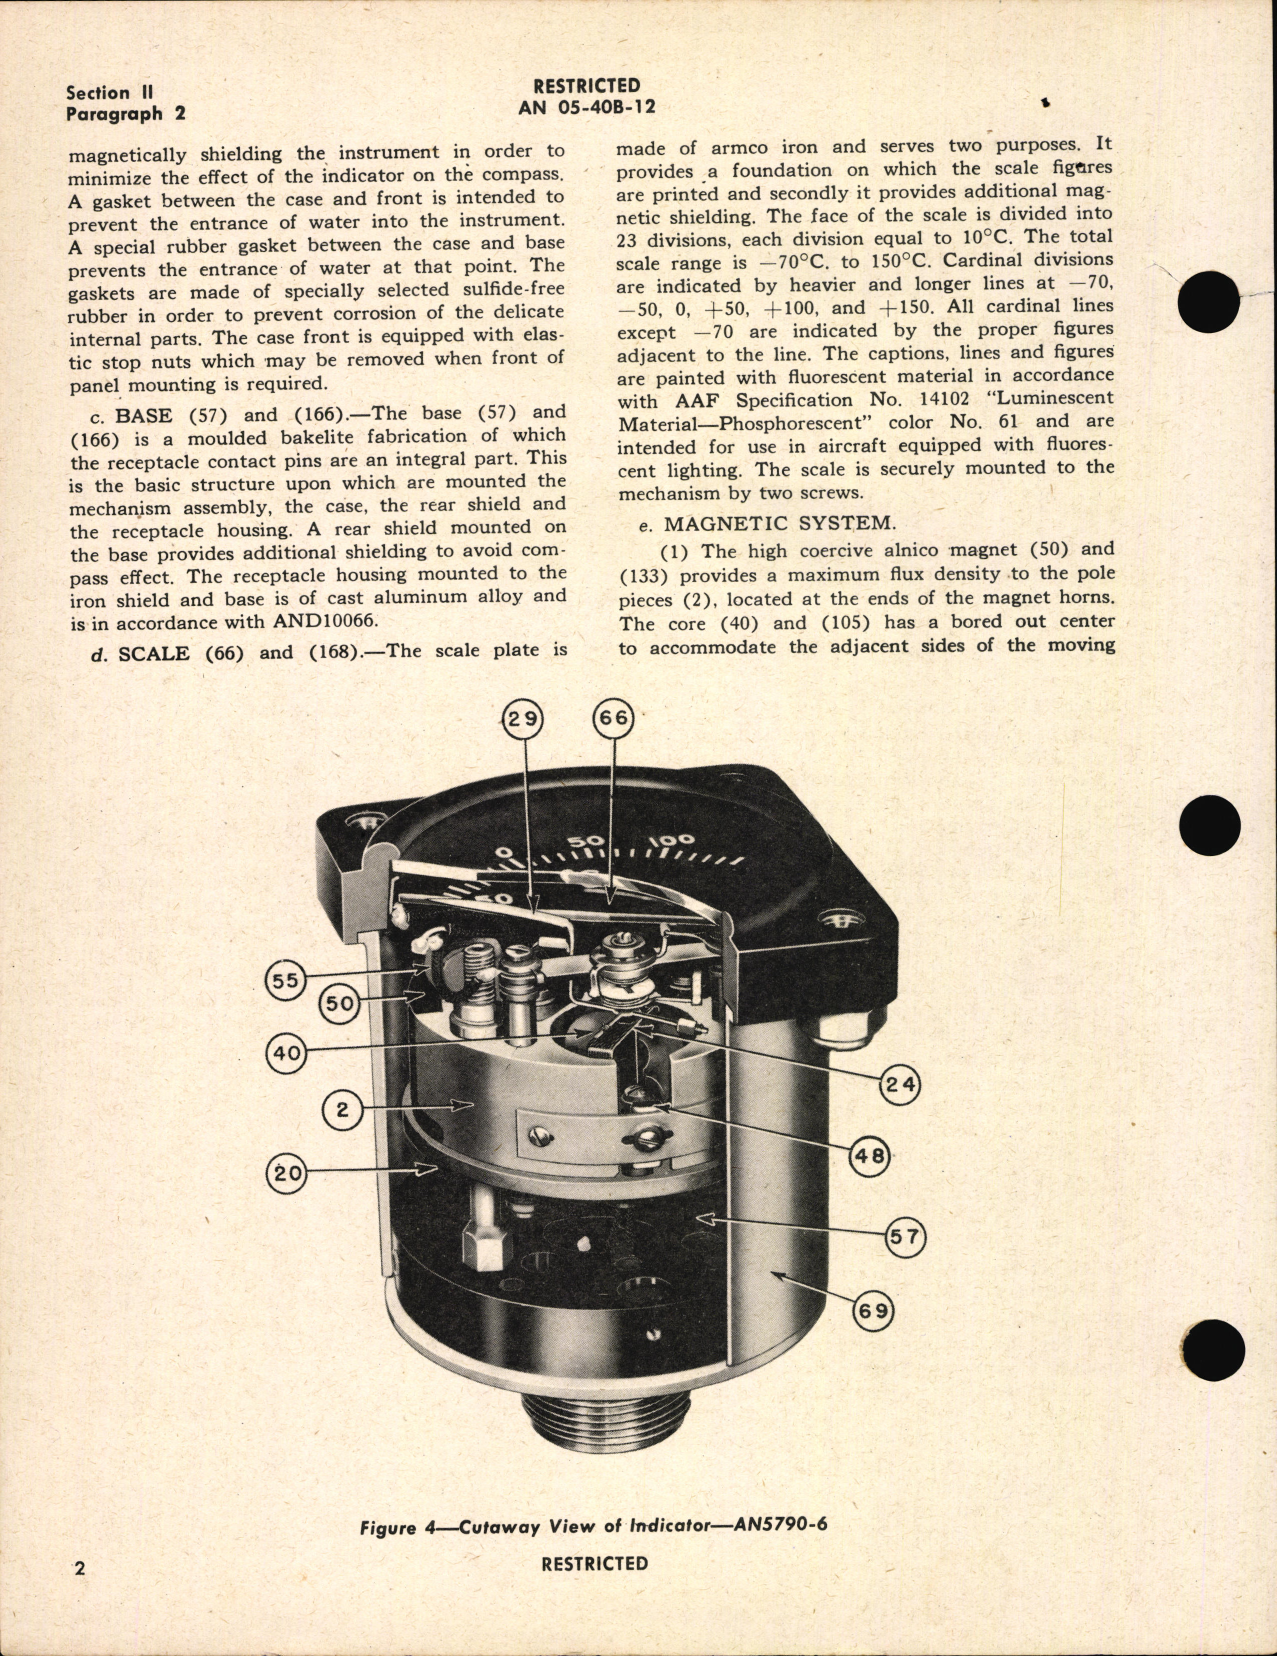 Sample page 8 from AirCorps Library document: Handbook of Instructions with Parts Catalog for Thermometer Indicators